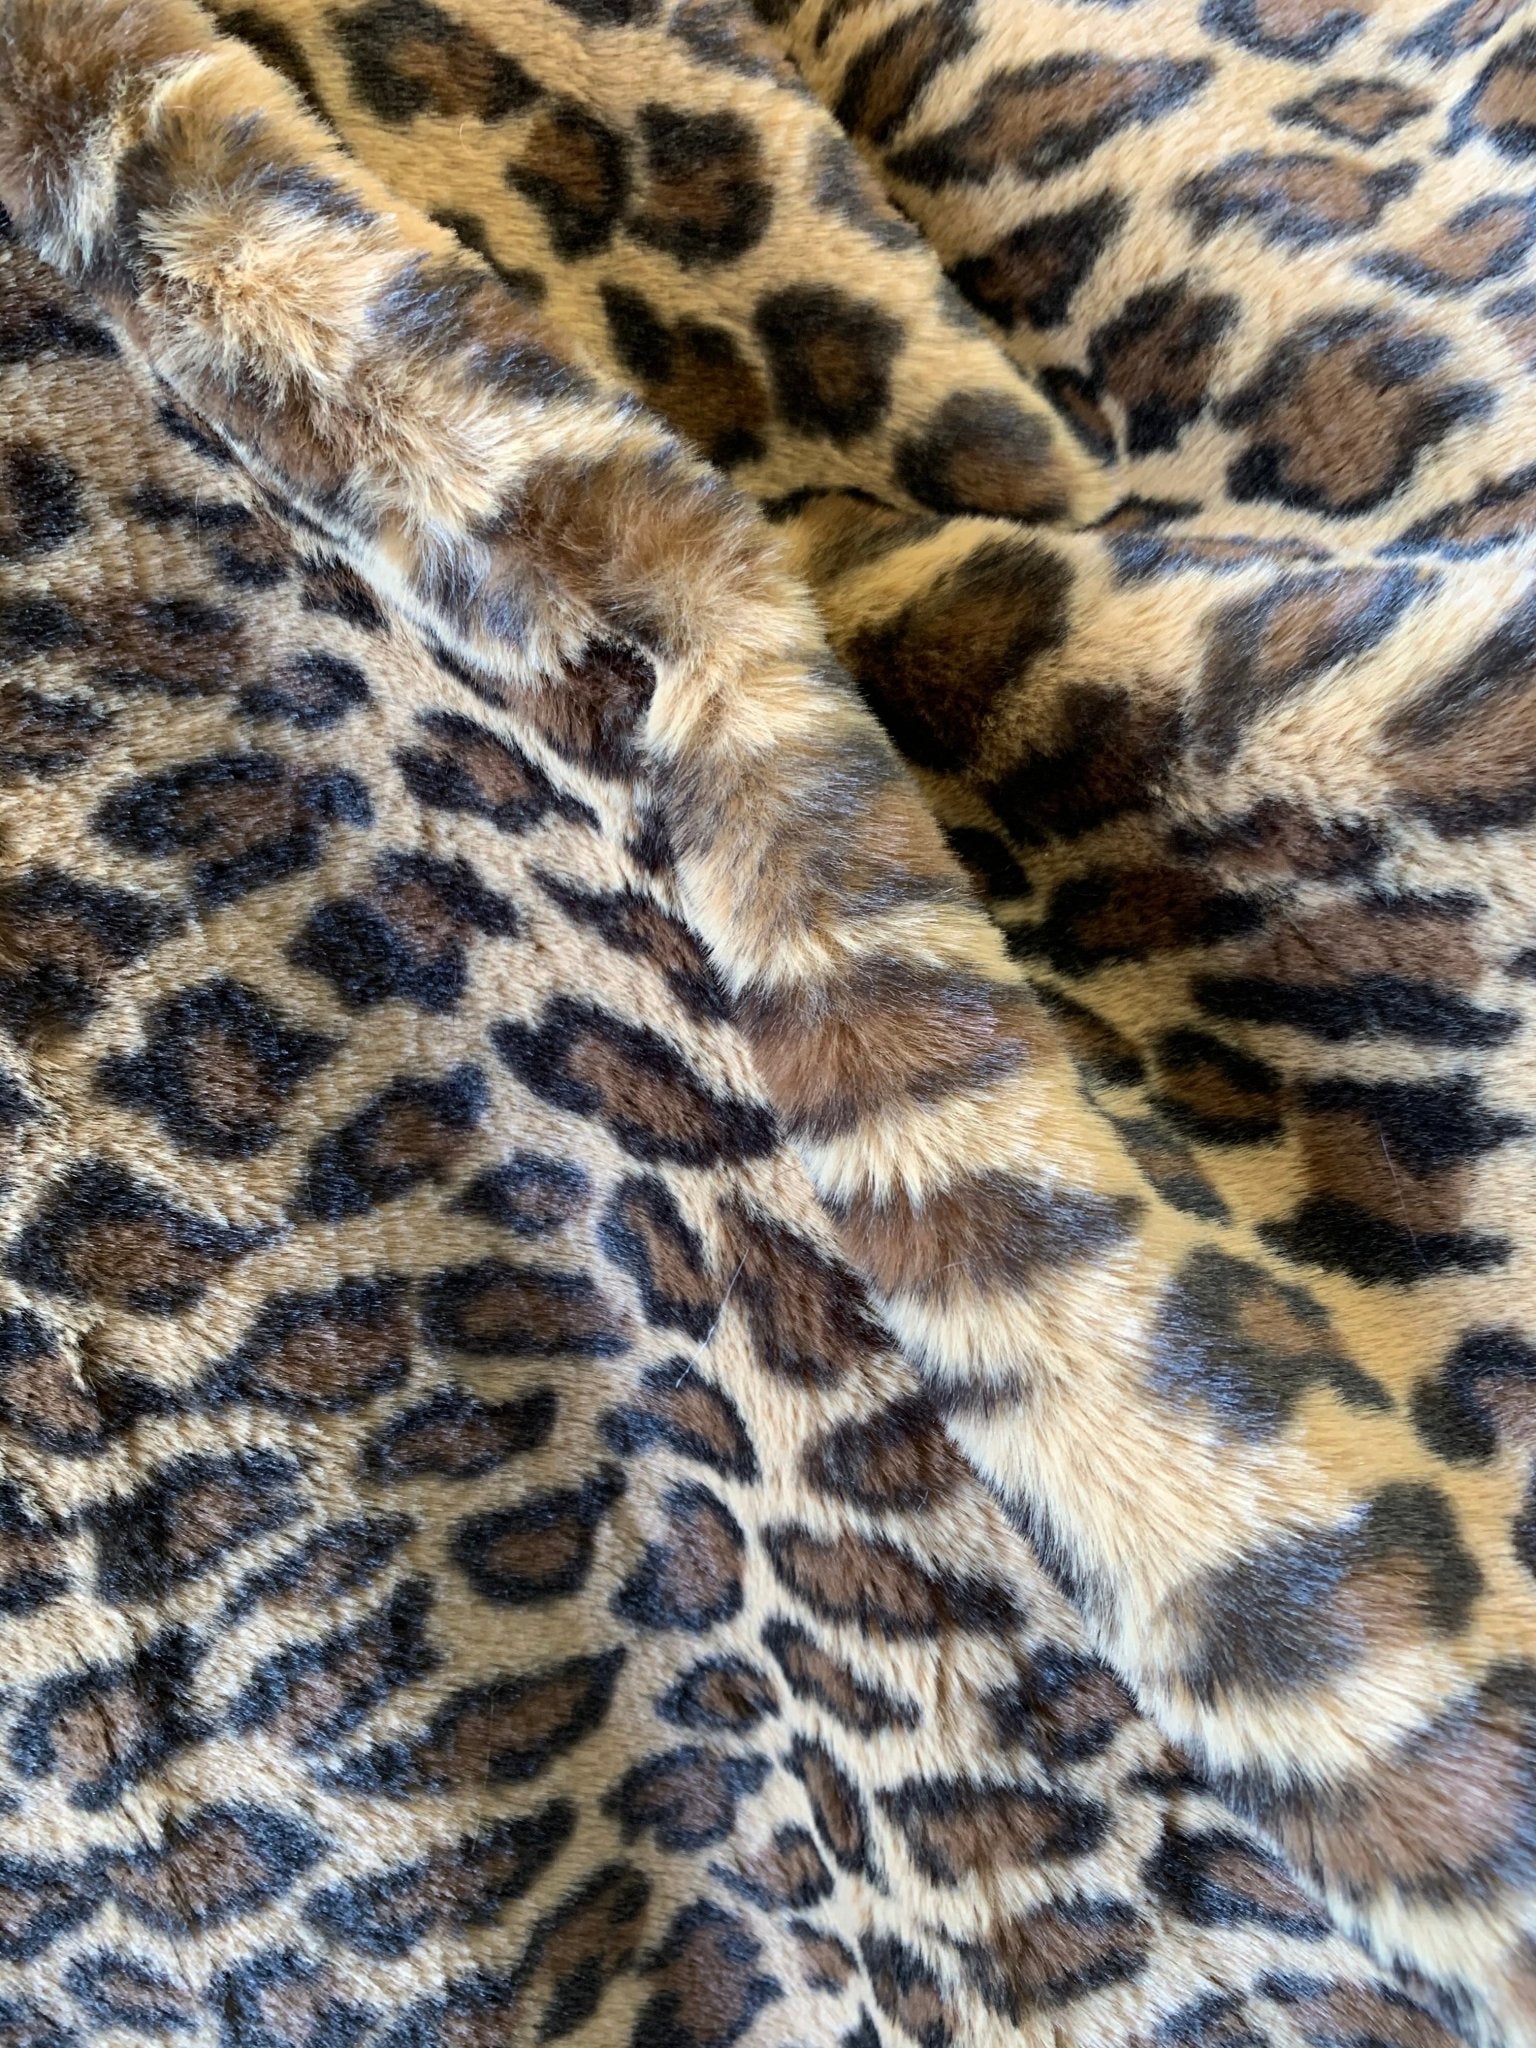 Leopard Fake Faux Fur Fabric By The Yard - Faux Fur Material Fashion FabricICEFABRICICE FABRICSCoffee BrownBy The Yard (60 inches Wide)Leopard Fake Faux Fur Fabric By The Yard - Faux Fur Material Fashion Fabric ICEFABRIC Coffee Brown